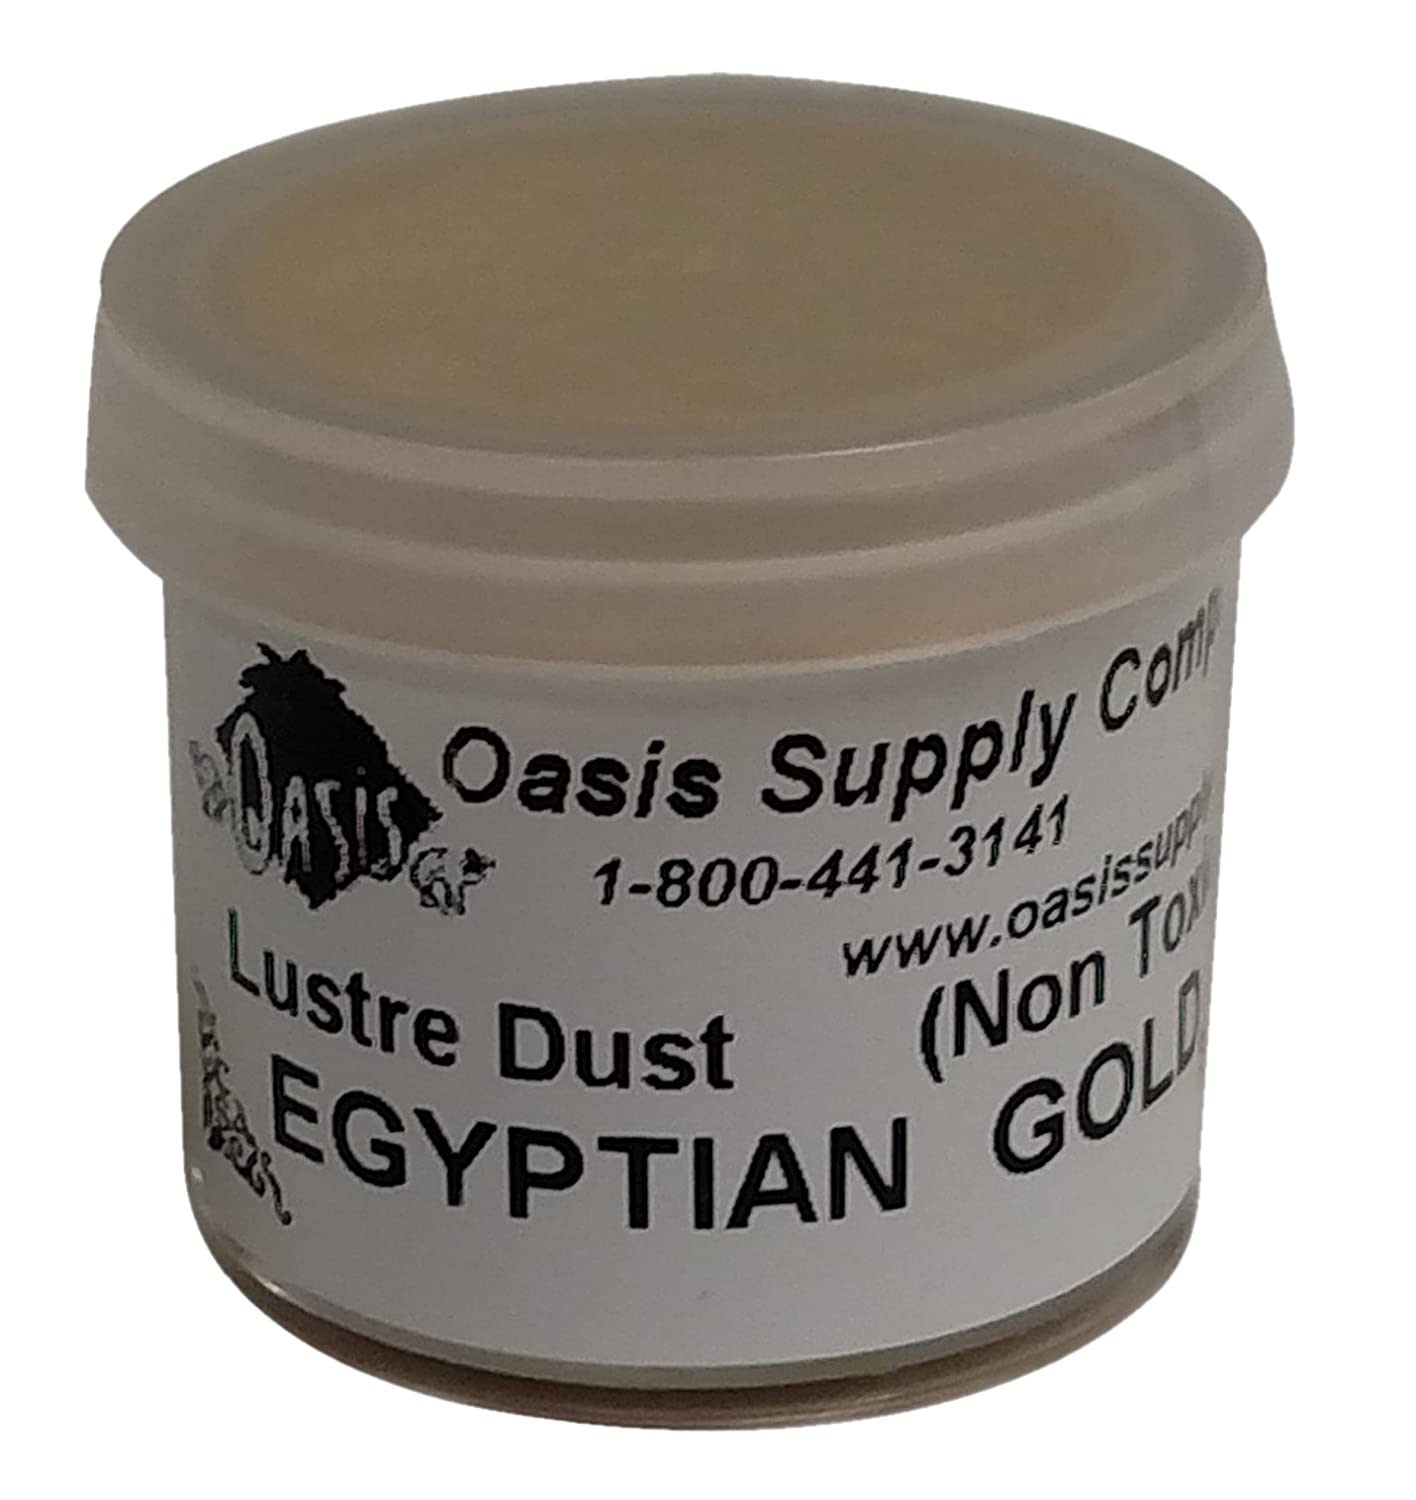 Super Gold/Egyptian Gold Luster Dust - Available in Two Sizes!